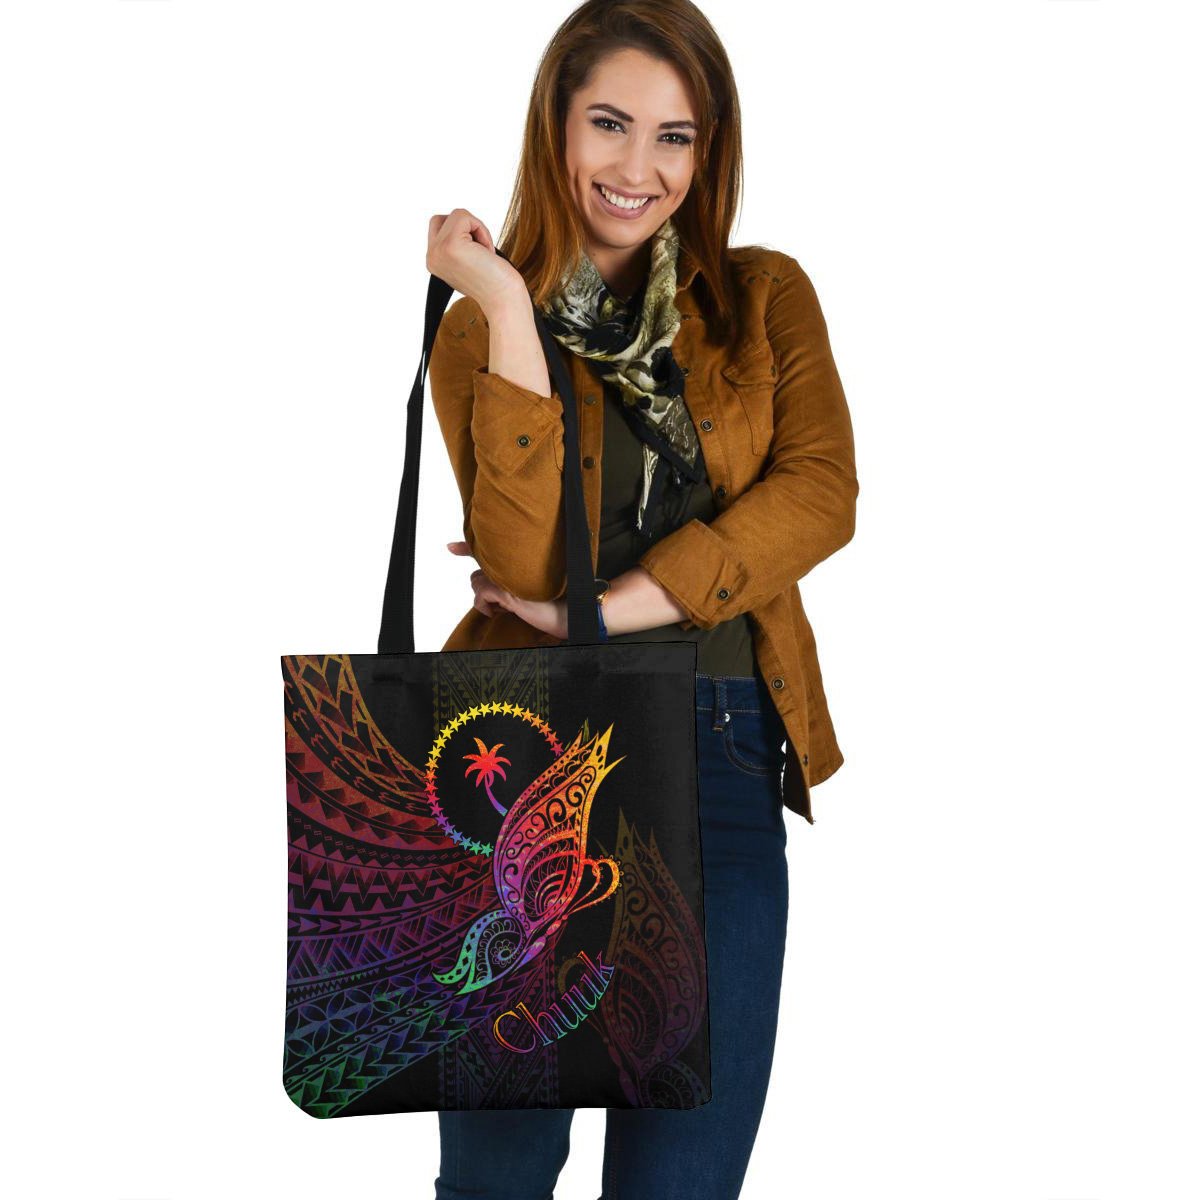 Chuuk State Tote Bag - Butterfly Polynesian Style Tote Bag One Size Black - Polynesian Pride